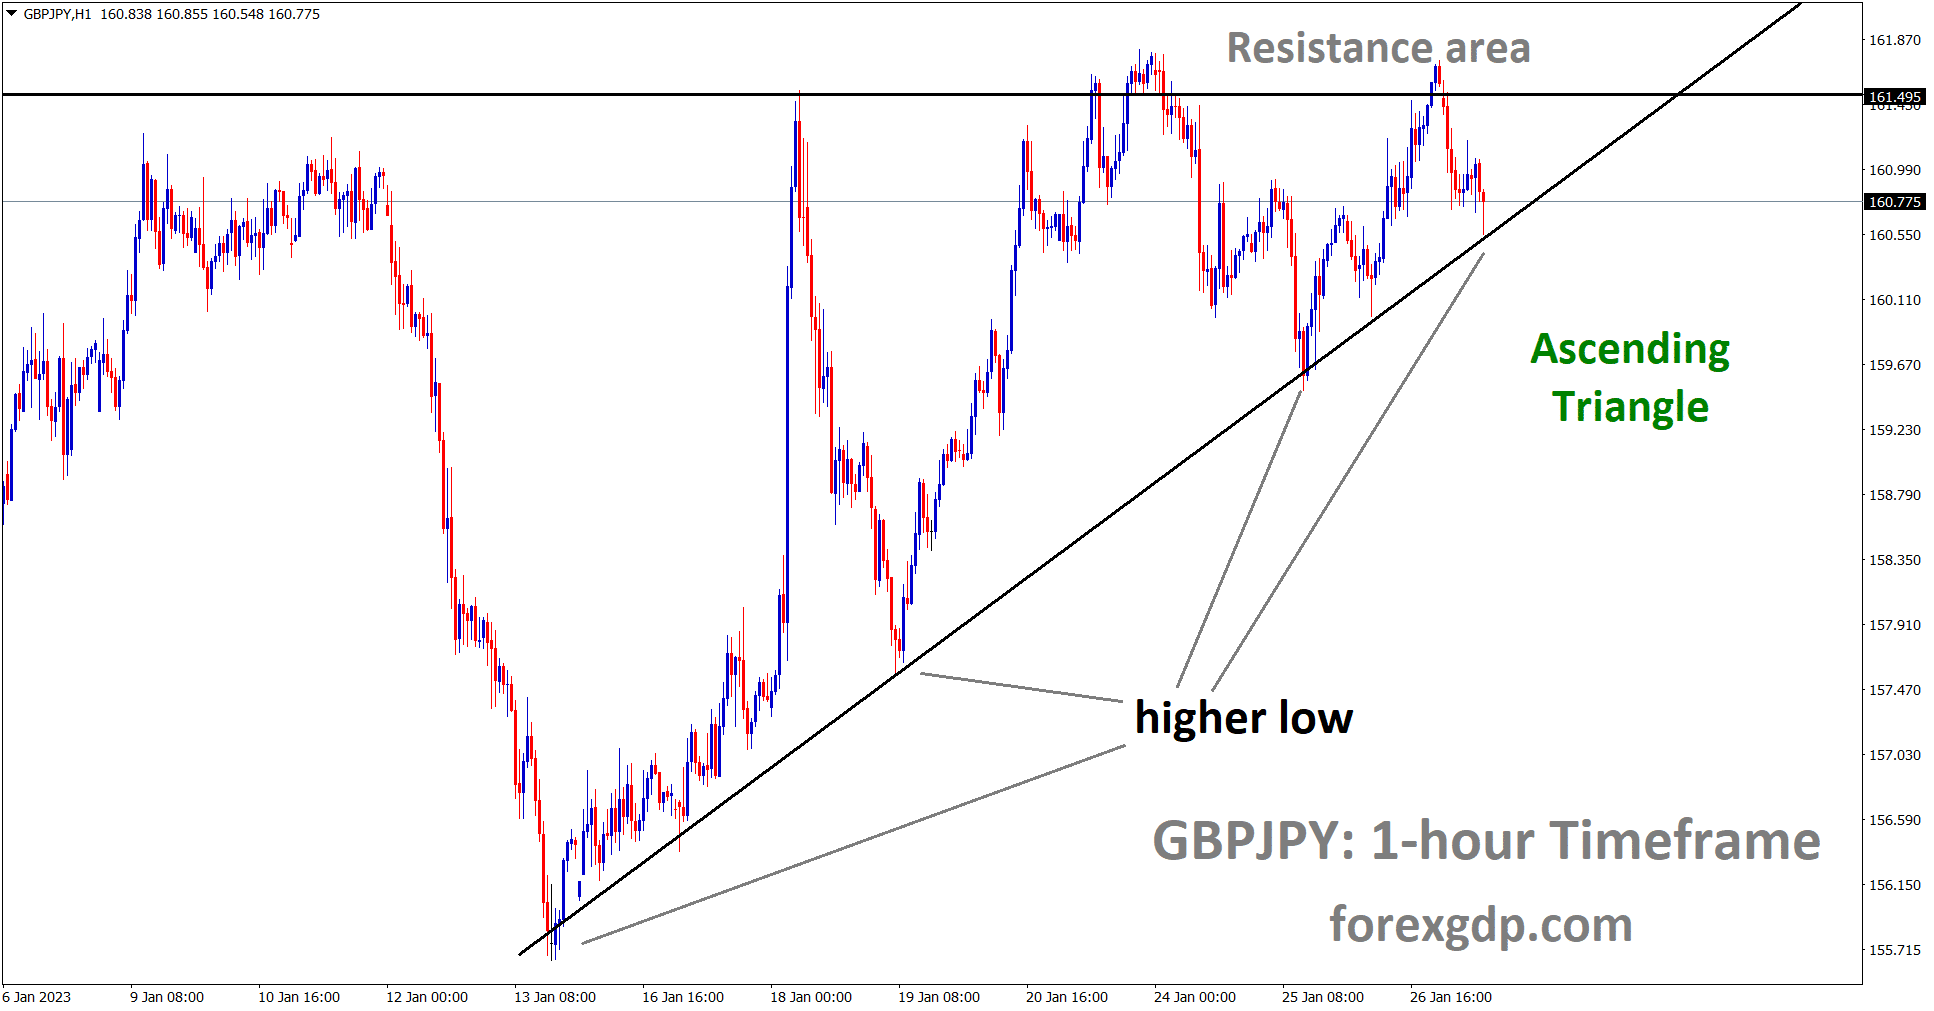 GBPJPY is moving in ascending Triangle pattern and the market has reached the higher low area of the pattern.